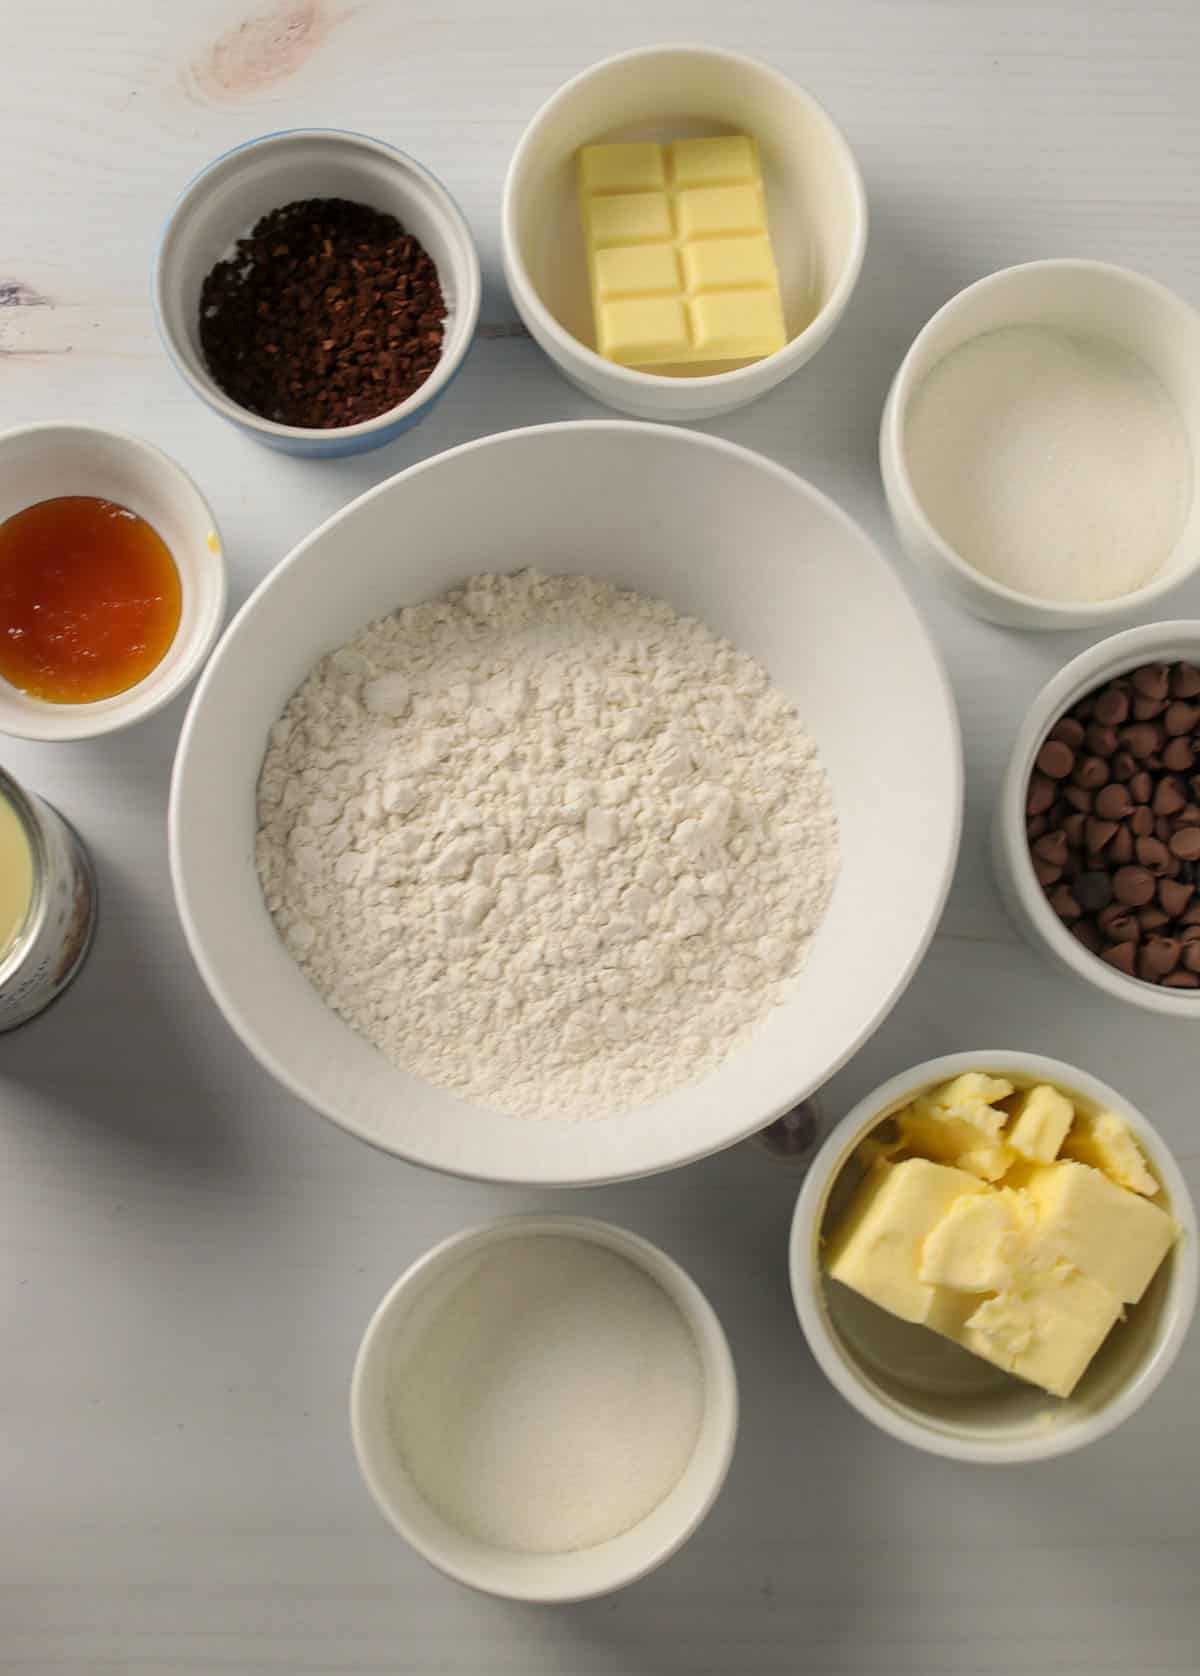 The ingredients for the Marbled Shortbread Cookies